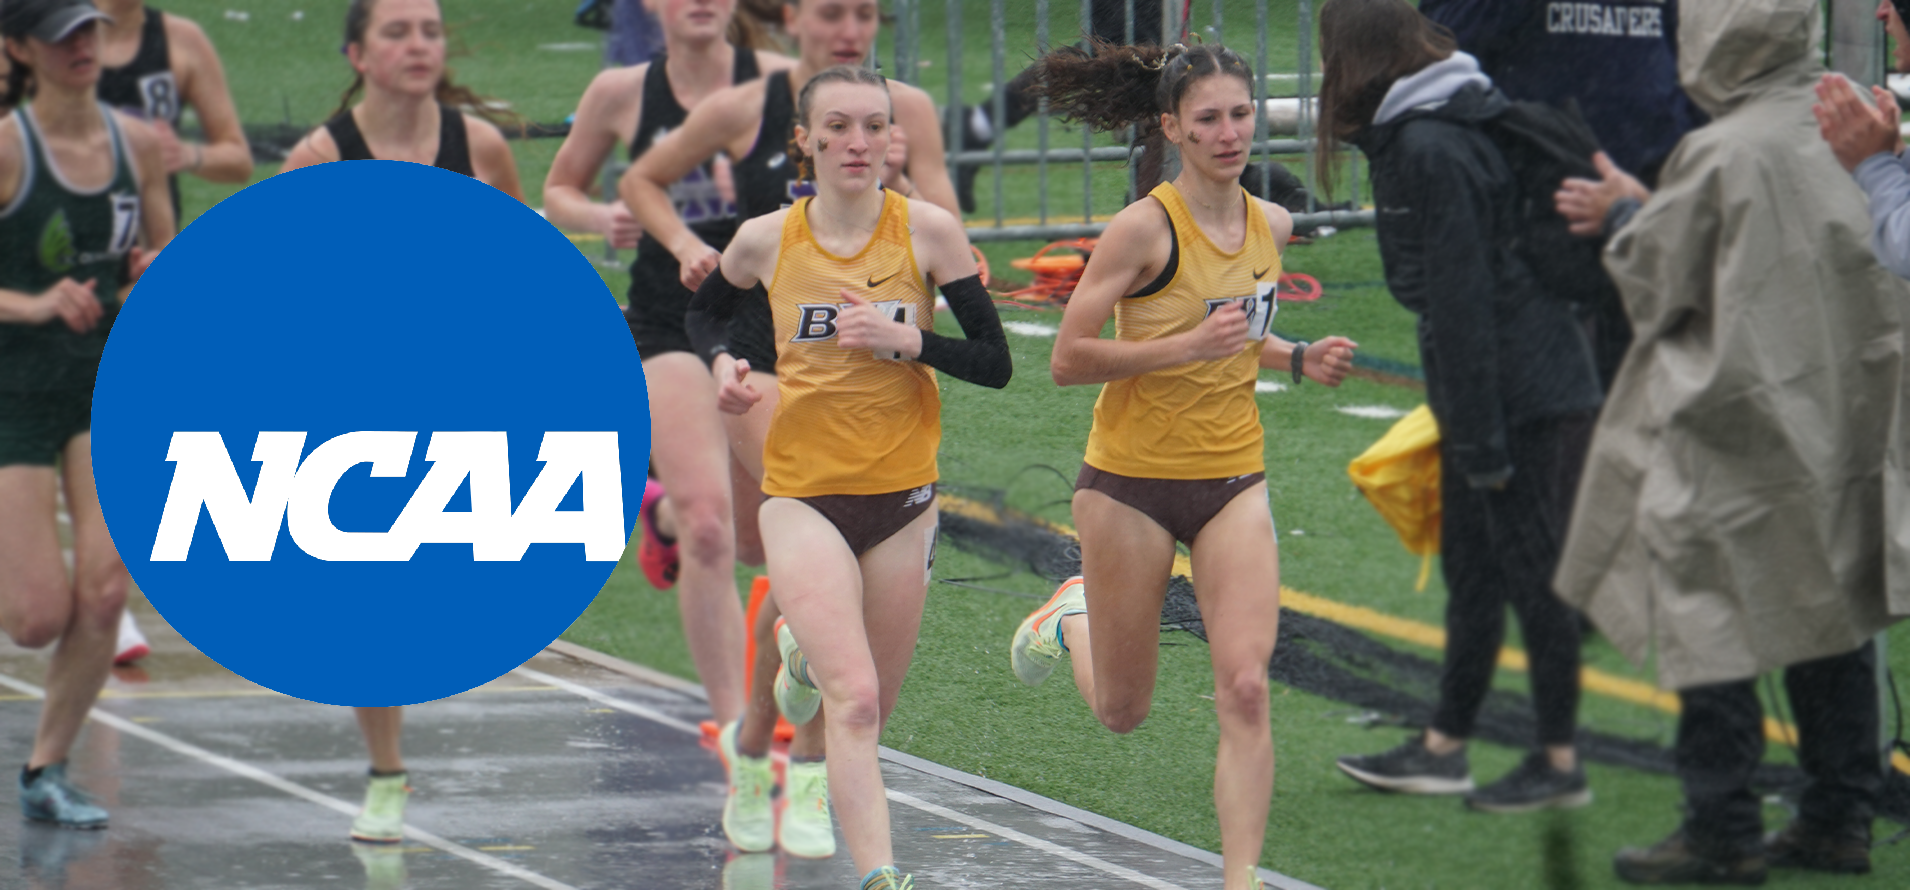 Murphy and Laughner Qualify for NCAA Division III Outdoor Track & Field Championships